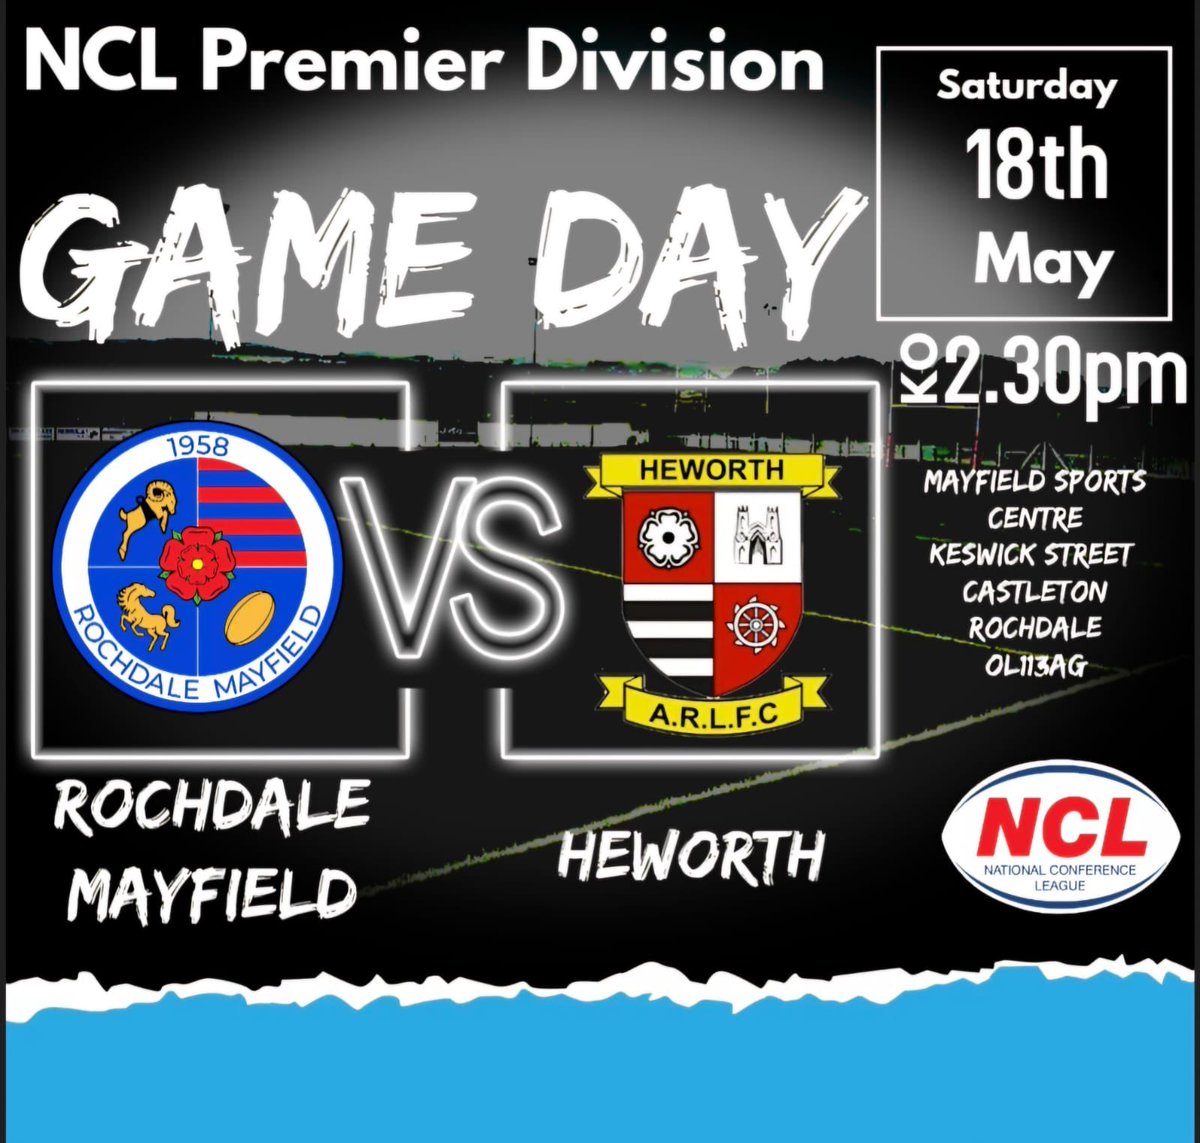 🏉HALF TIME🏉 🏆 @OfficialNCL Round 10 Rochdale Mayfield 18 @HeworthRugby 4 #BacktheFieldin24